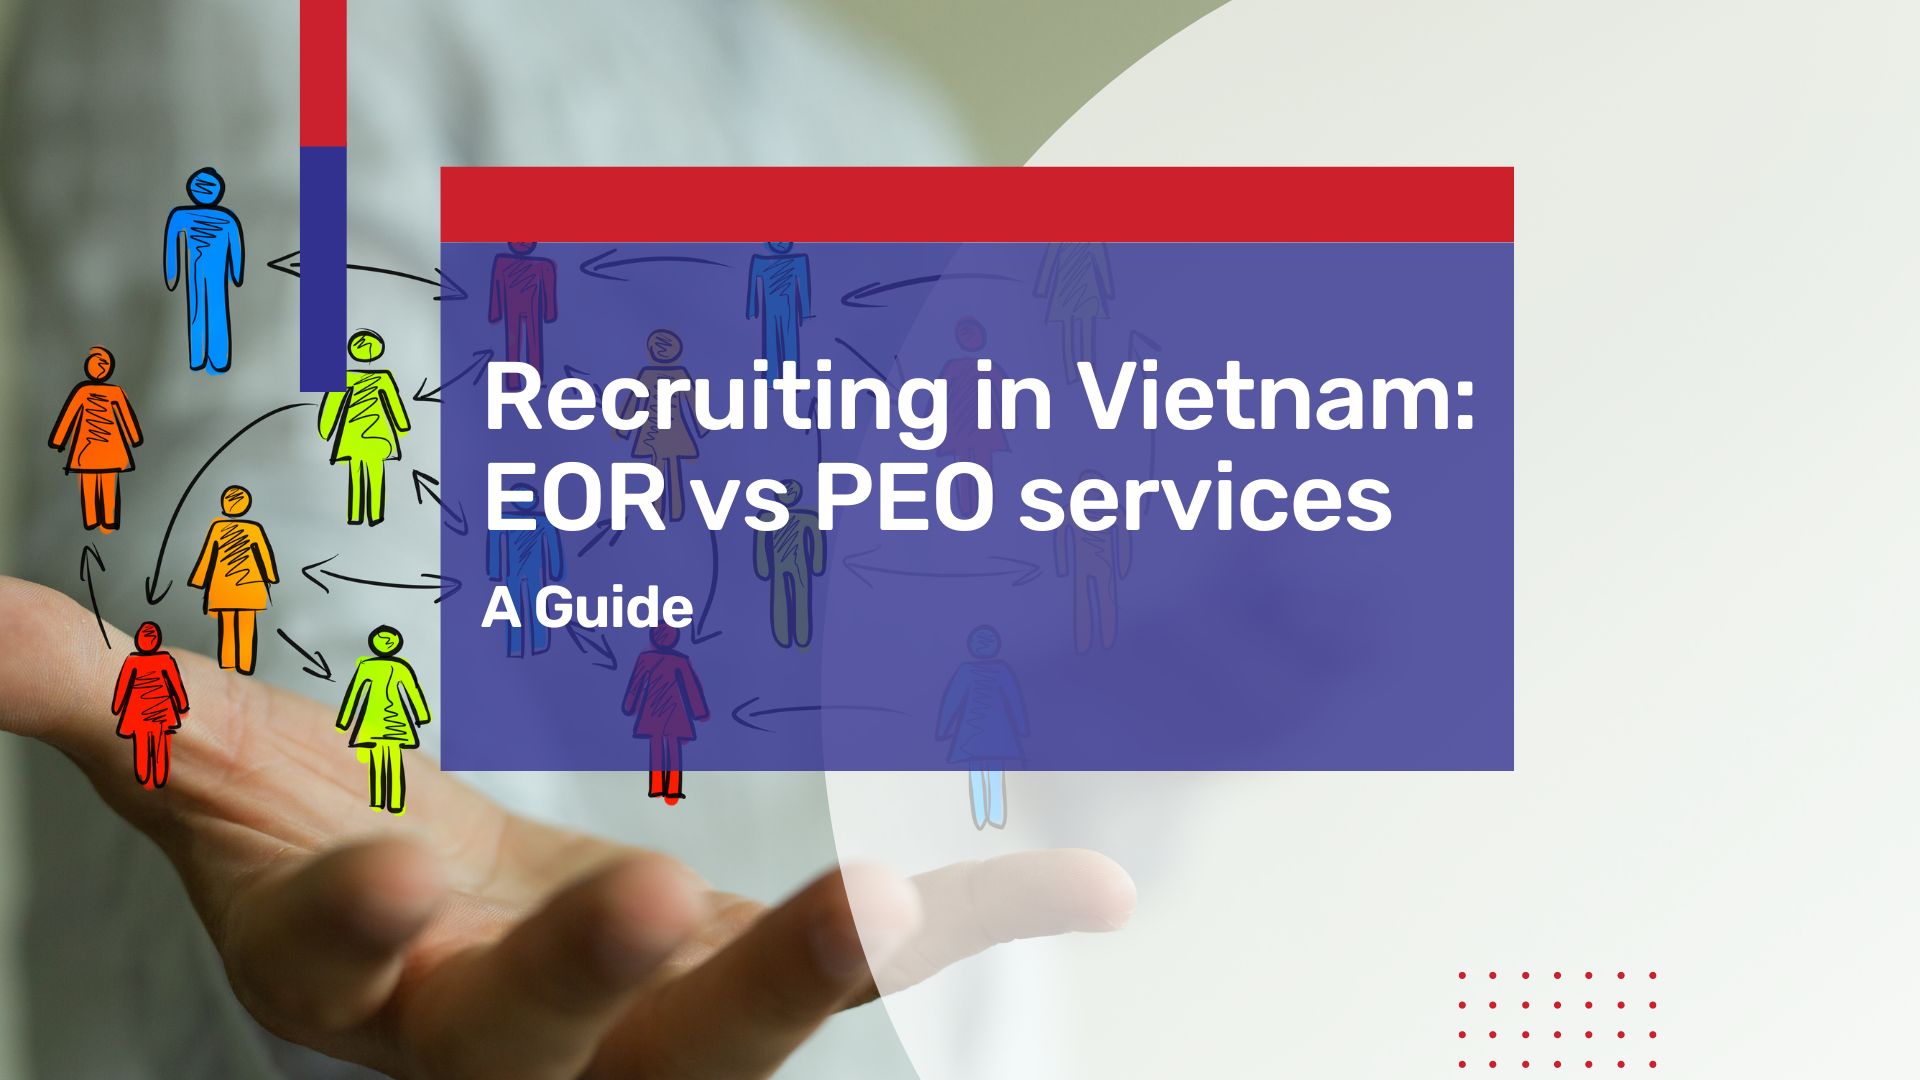 HR Outsourcing in Vietnam: A Comparison between EOR and PEO for Recruitment Operations